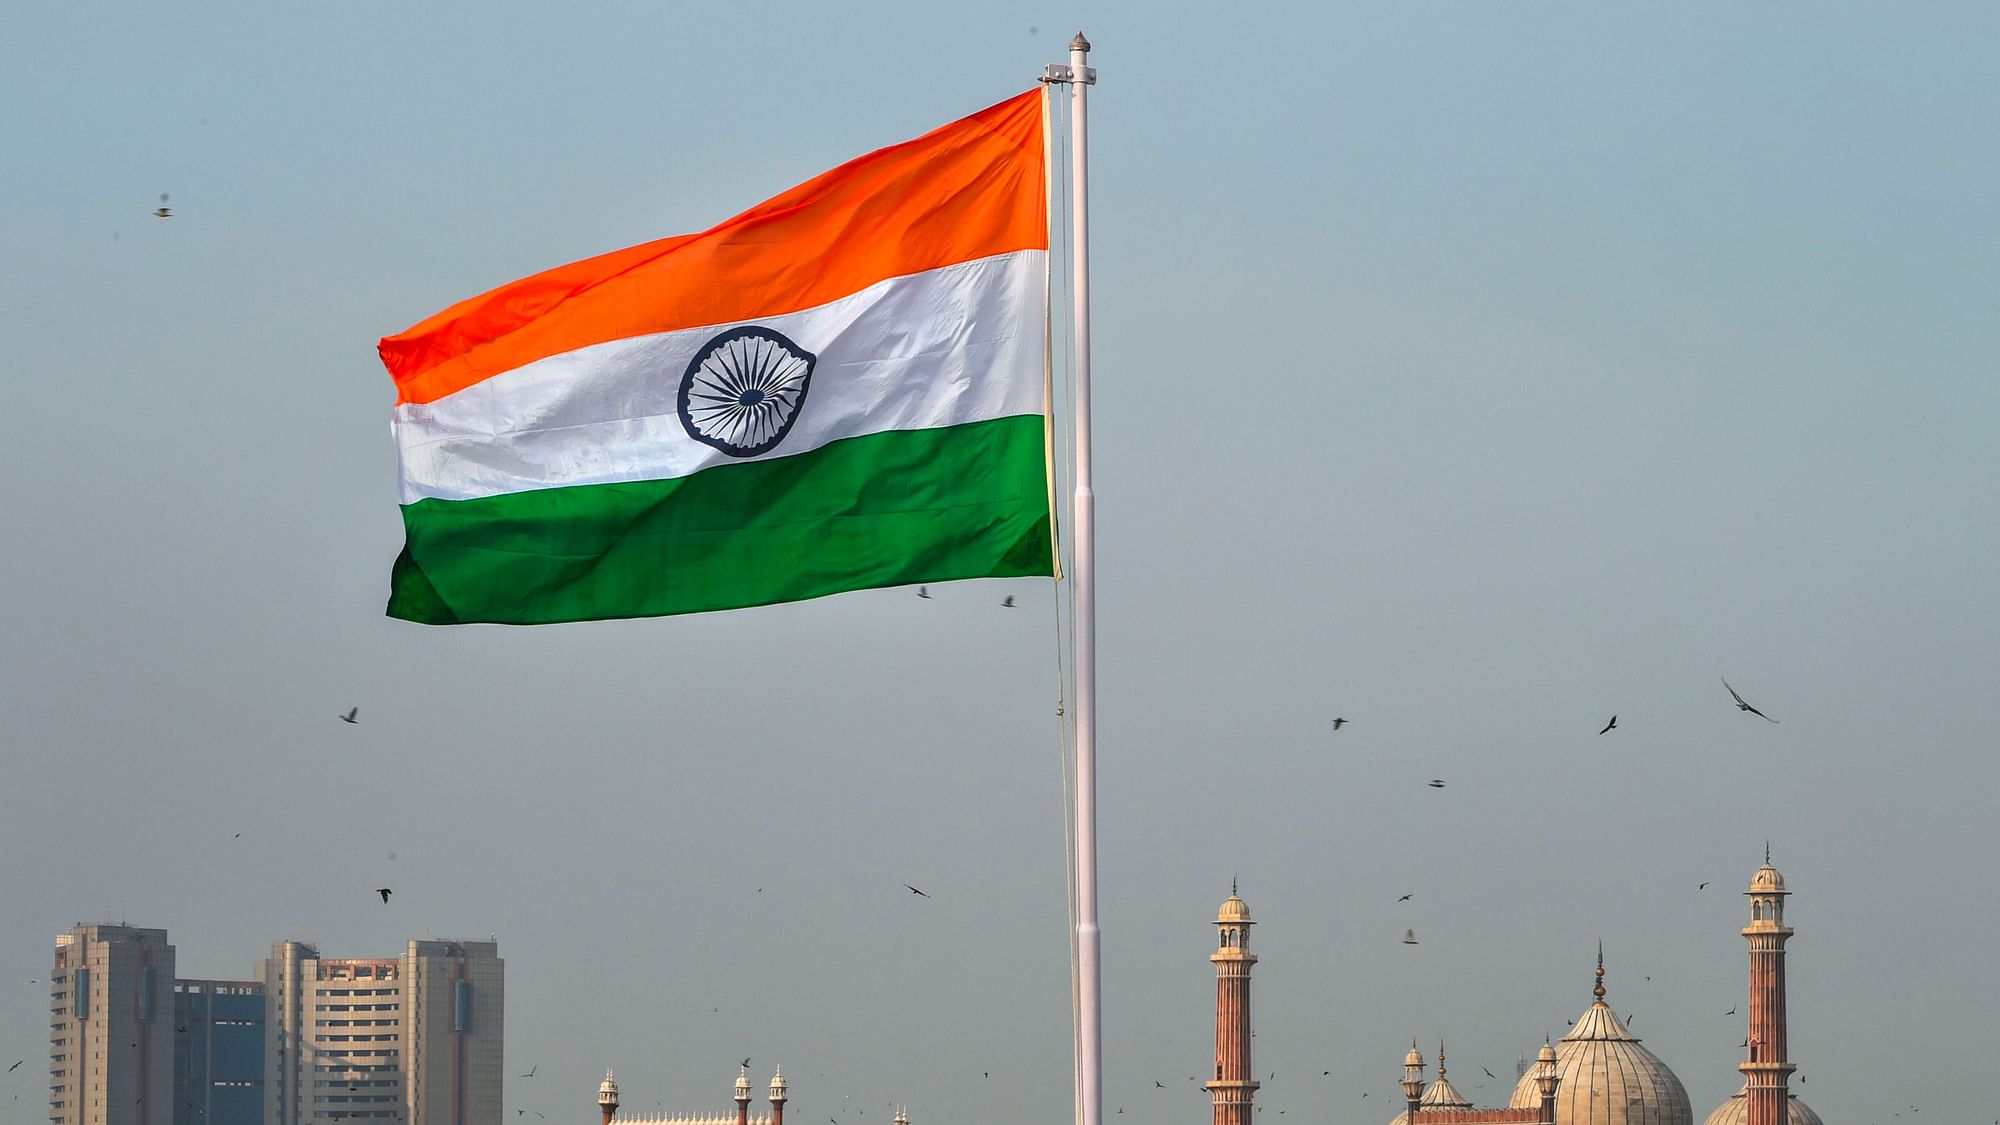 An Indian flag hoisted at the Red Fort, where the prime minister’s speech will take place.